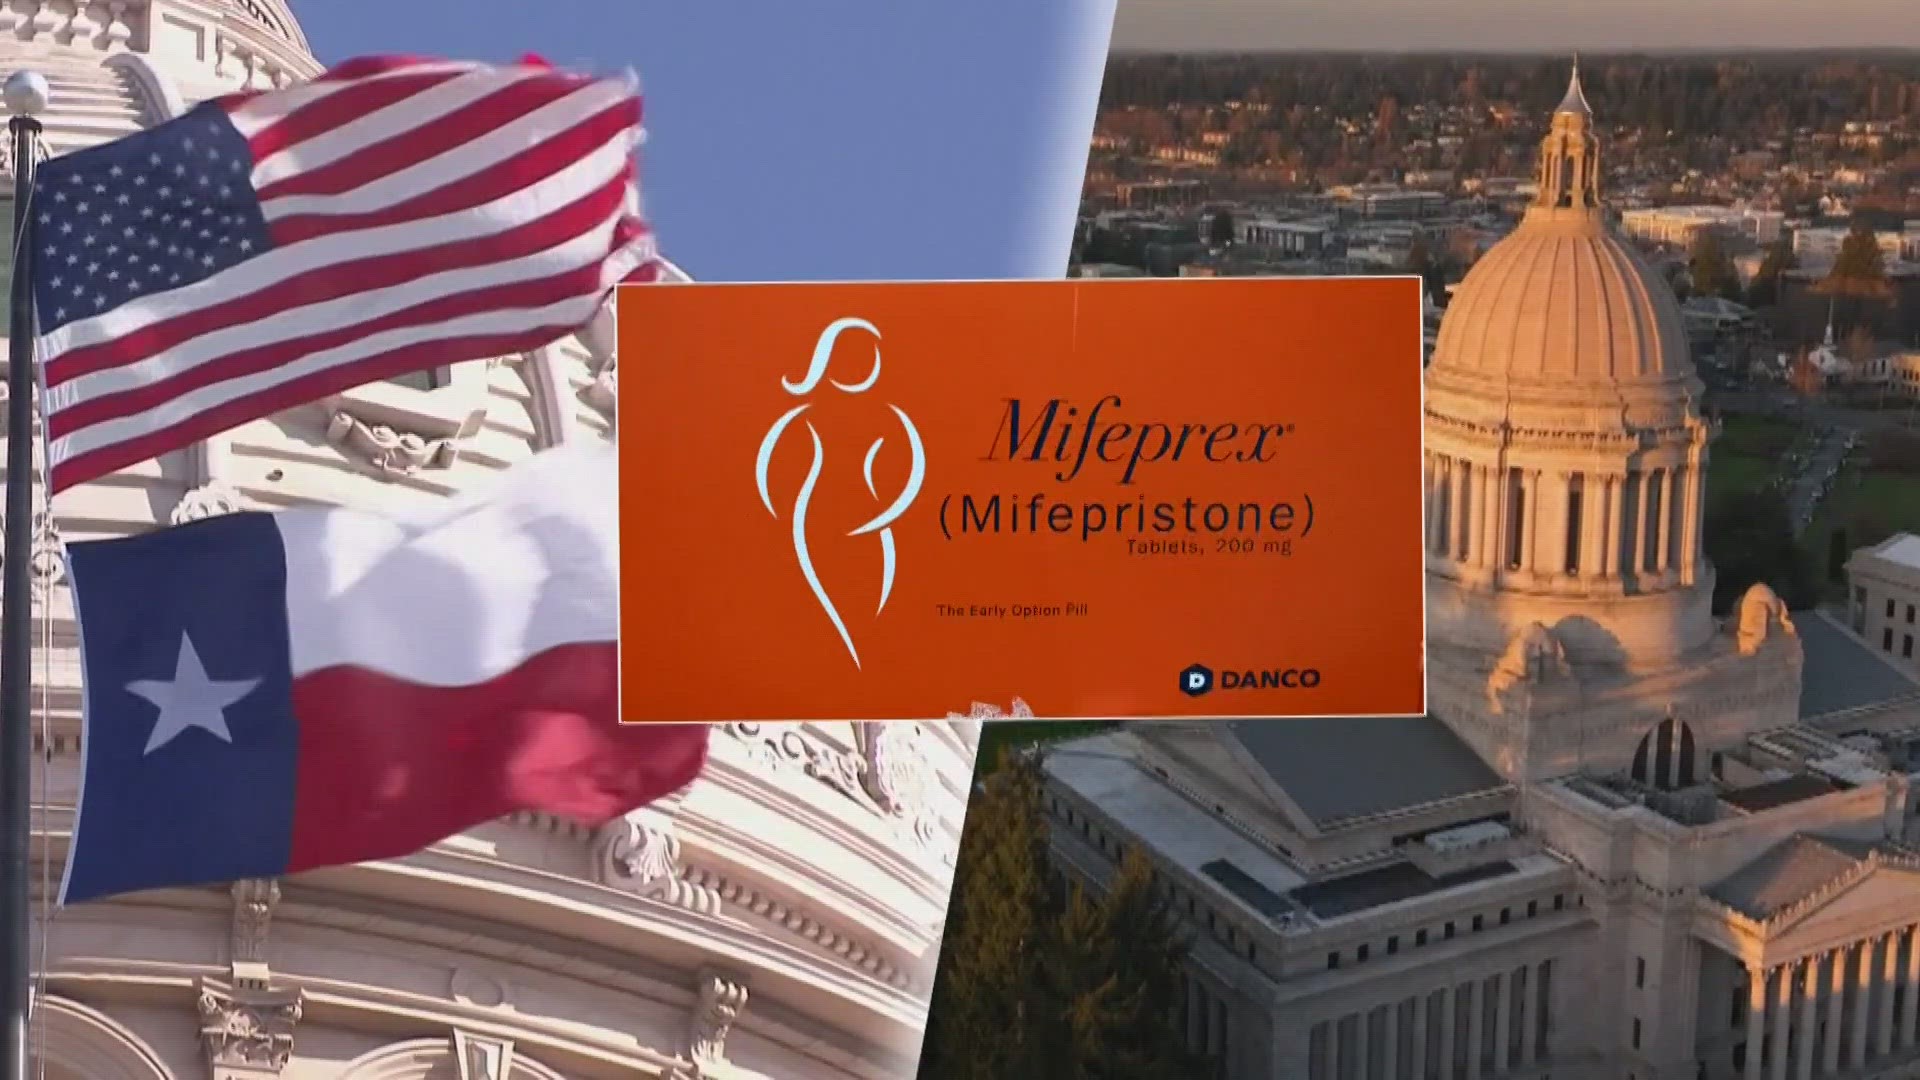 Some governors are stockpiling the abortion pill Mifepristone to make sure people still have access. NBC's Alice Barr has the latest.